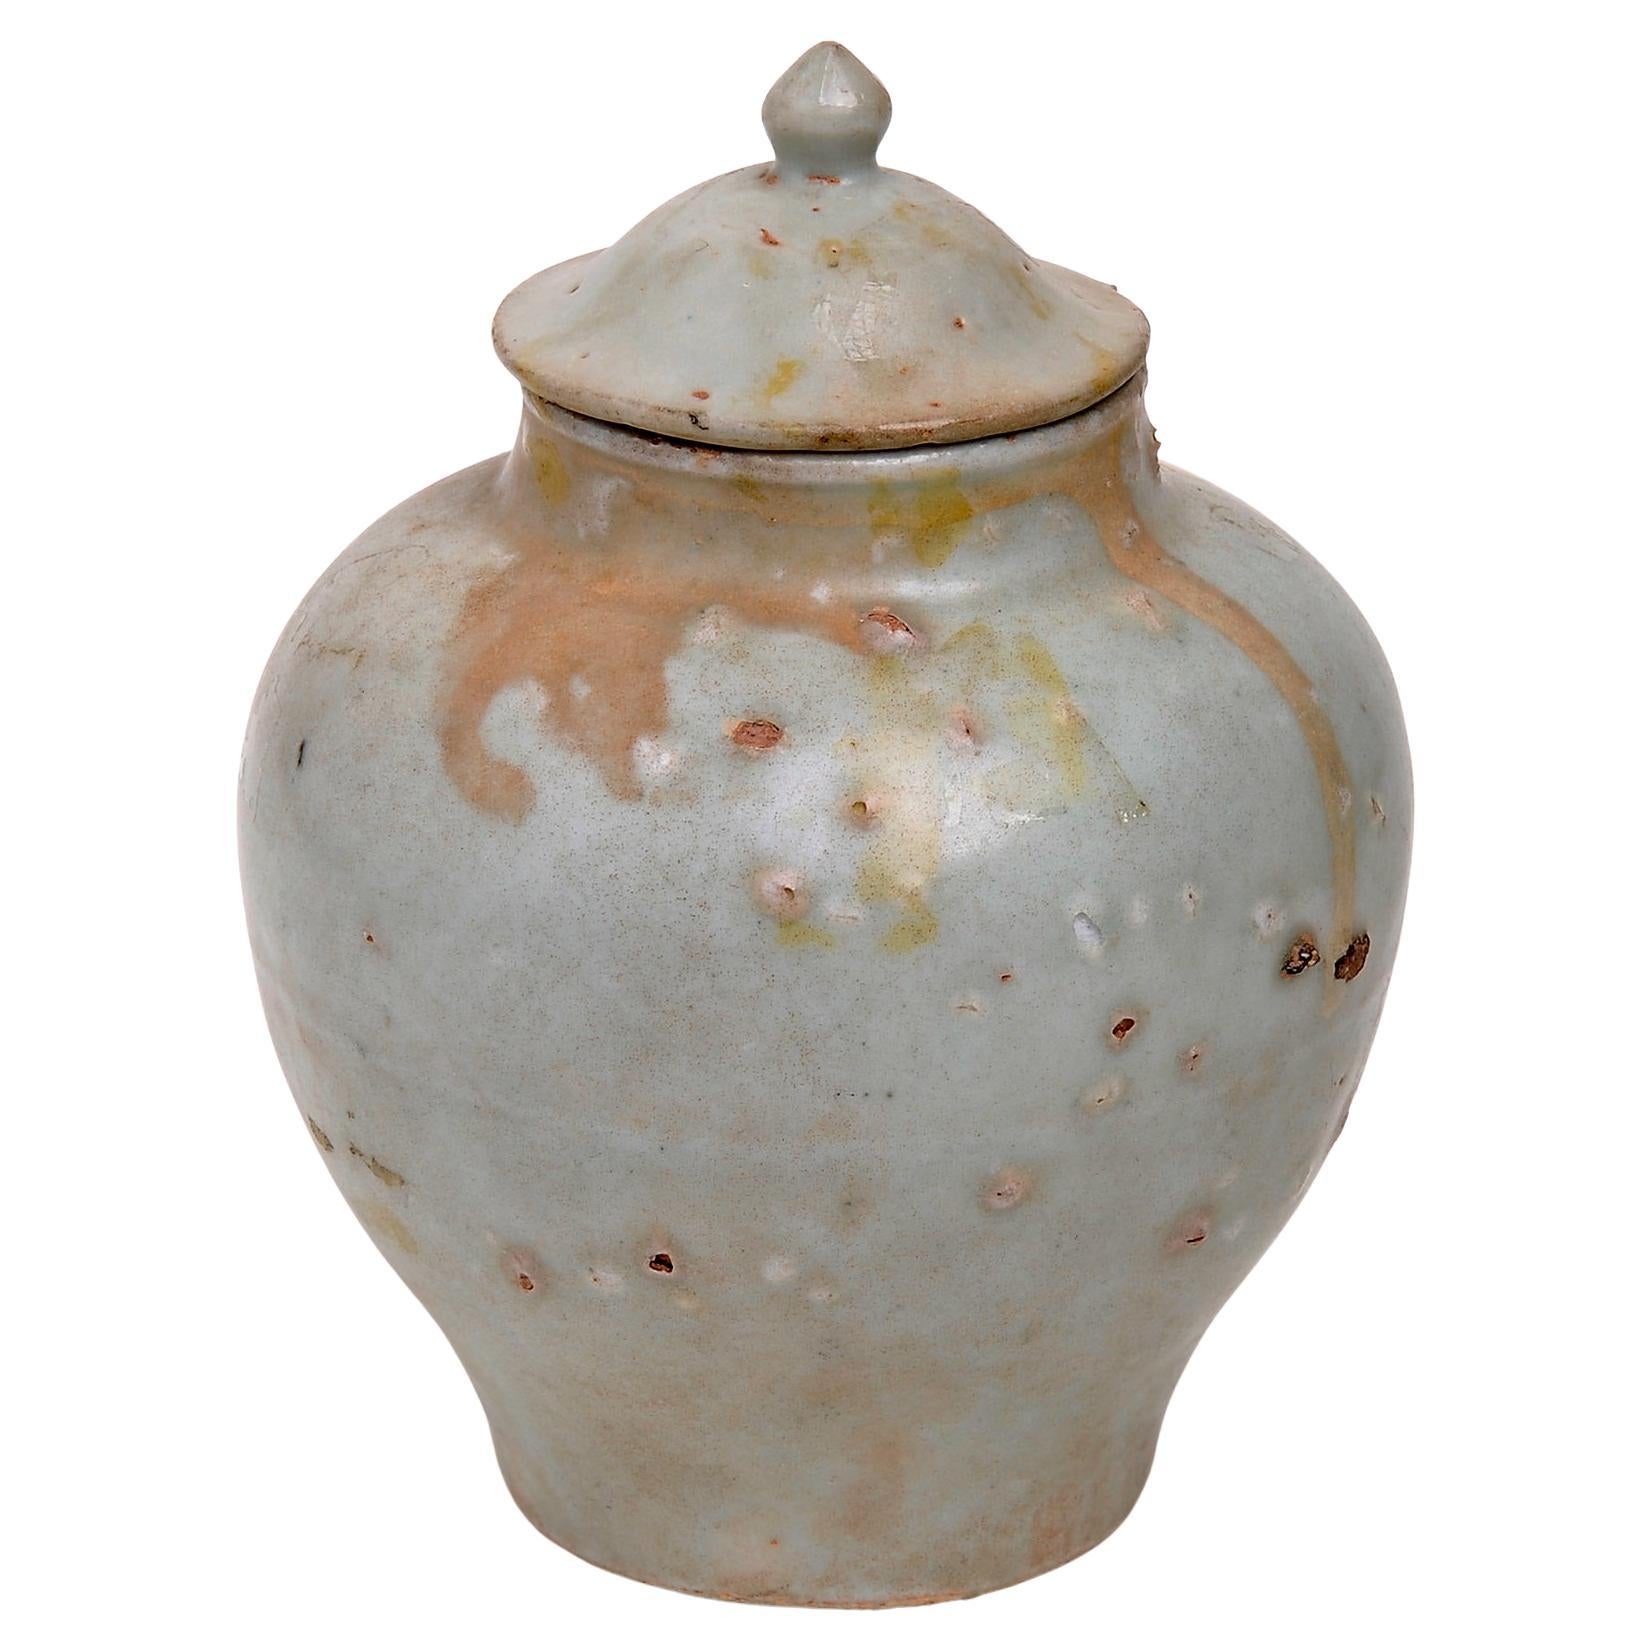 Antique Porcelain Chinese Jar with Lid